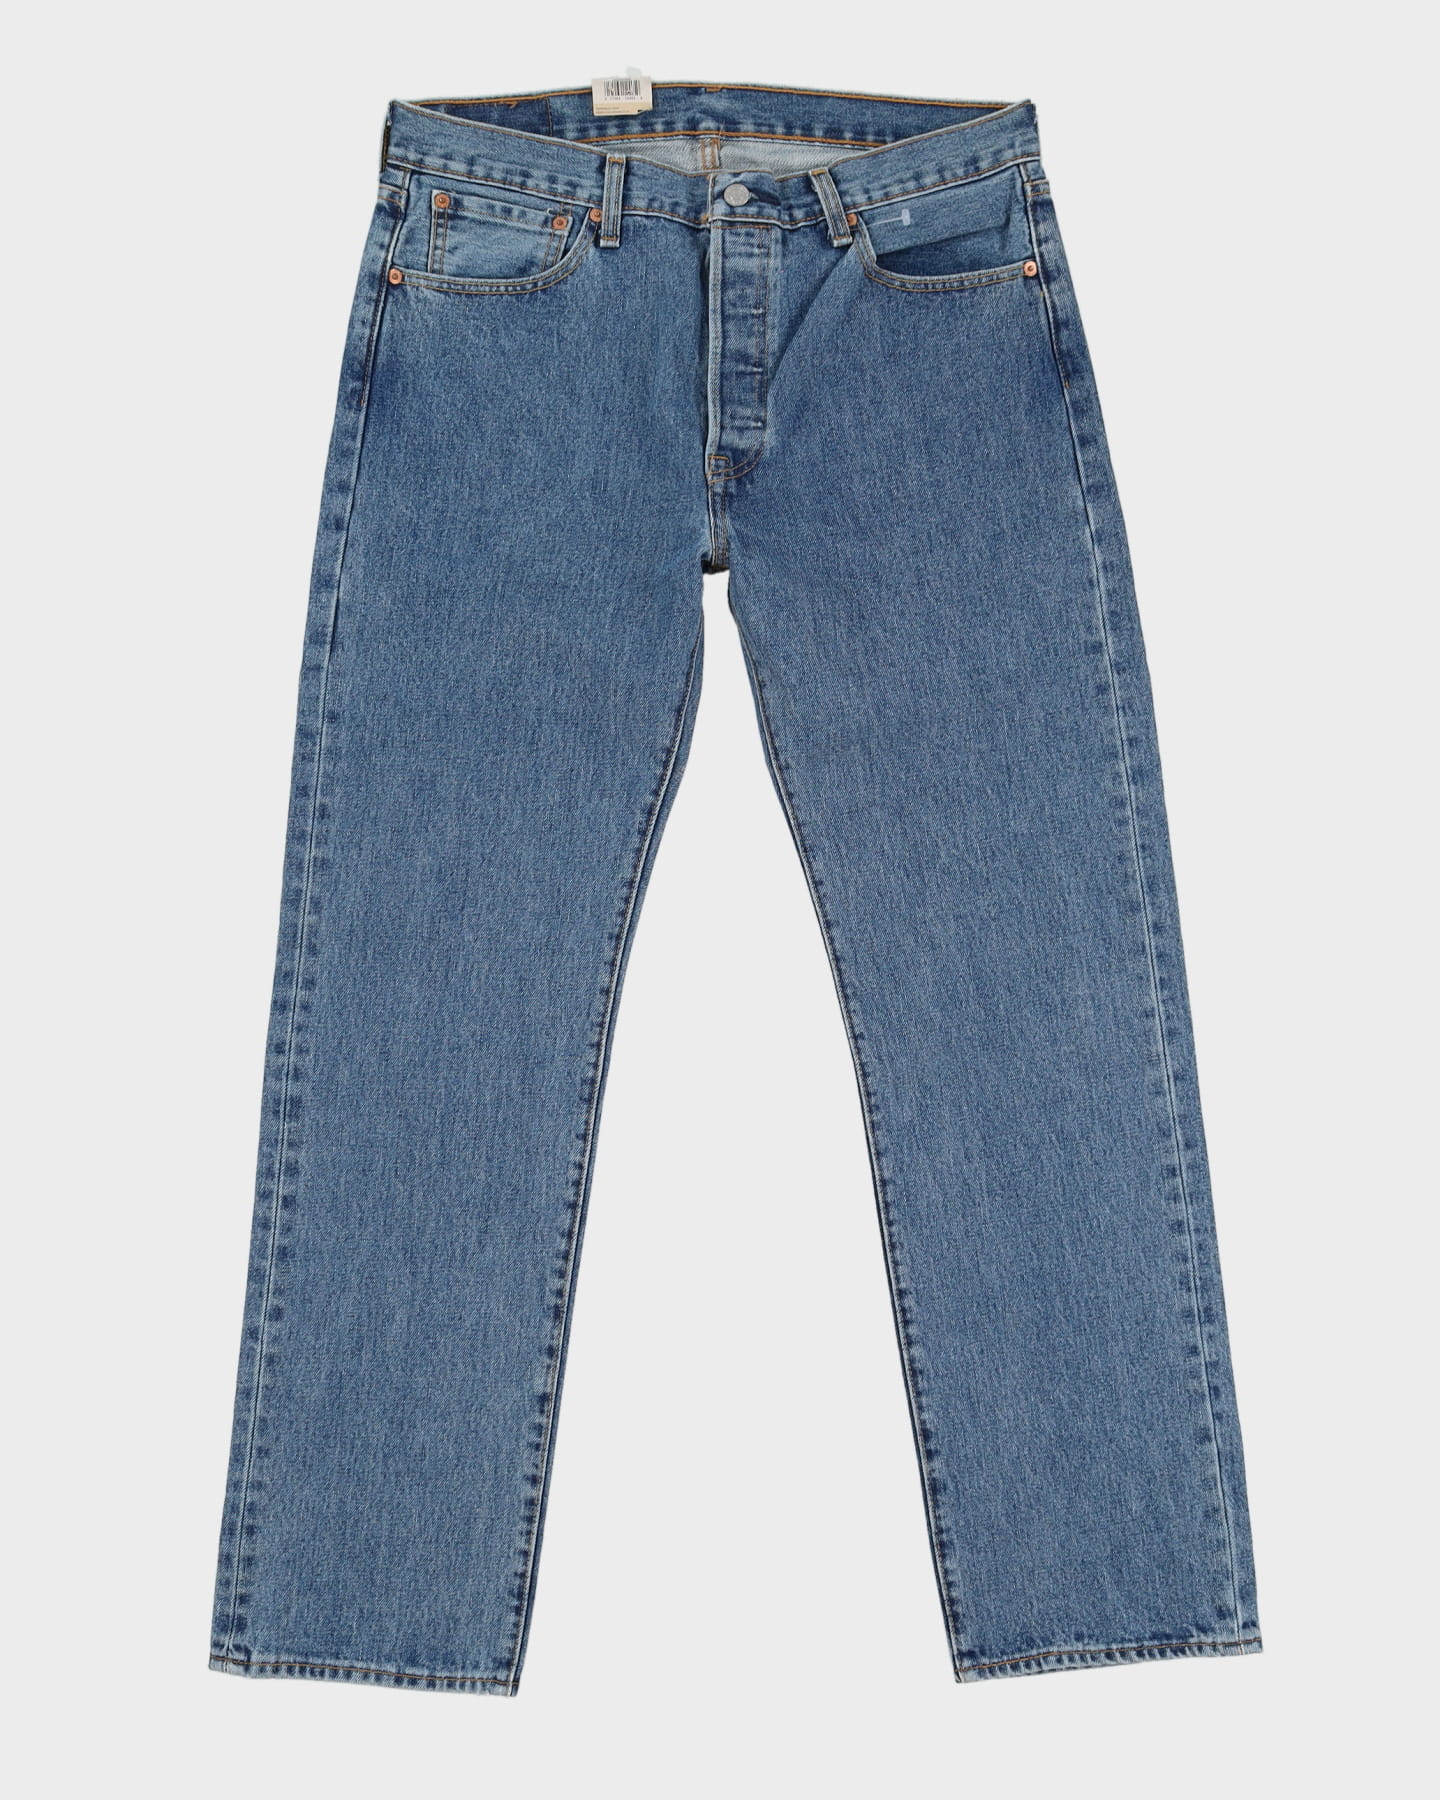 Deadstock With Tags Levi's 501 Blue Jeans - W33 L30